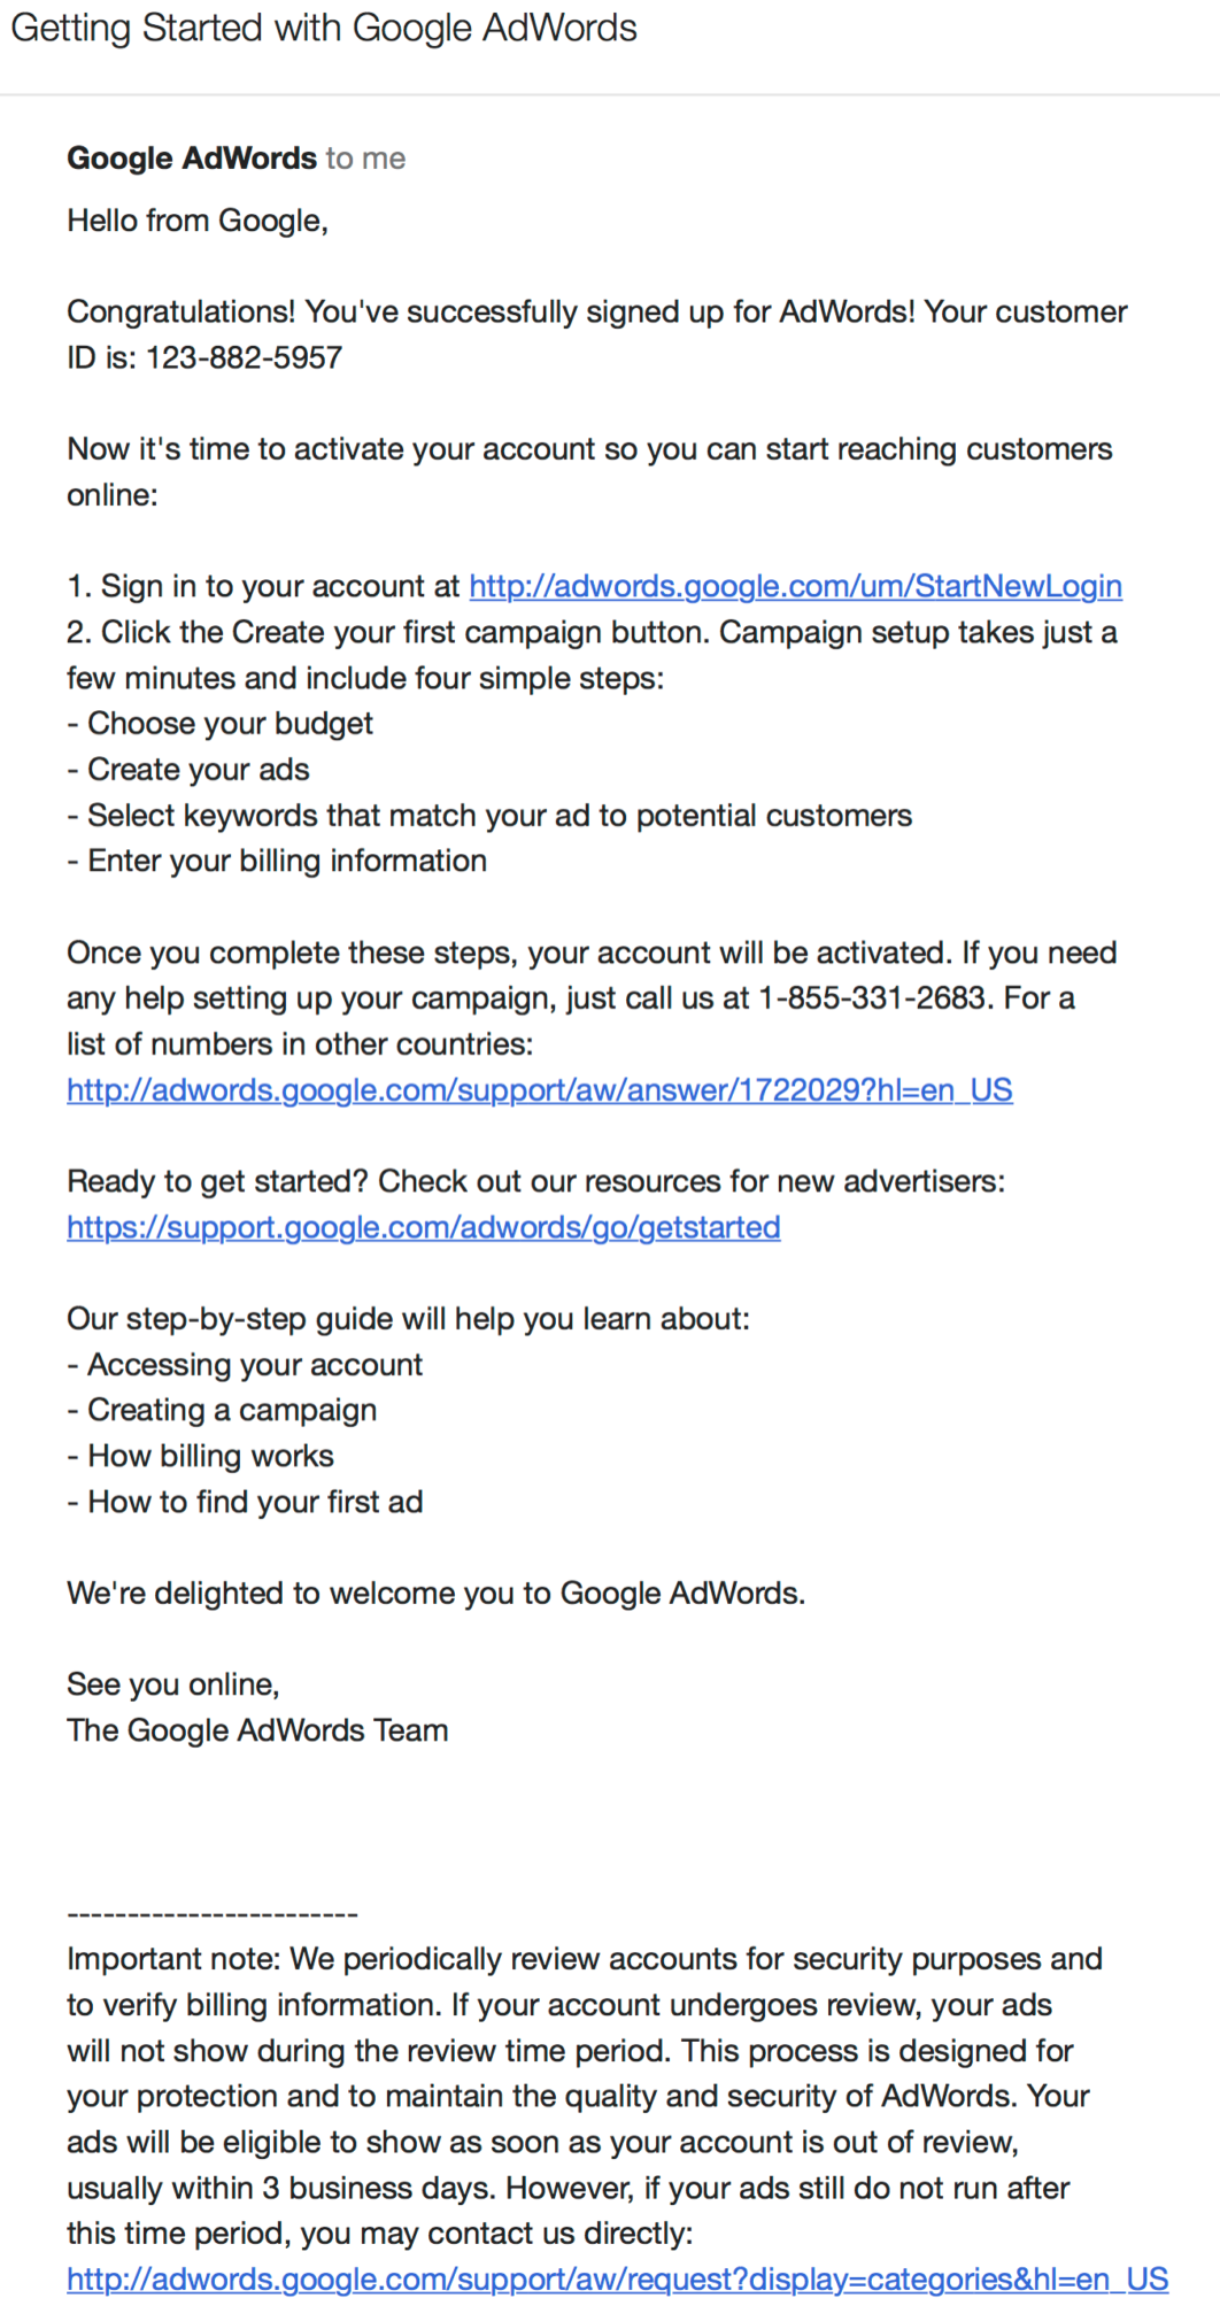 Screenshot of an AdWords welcome email